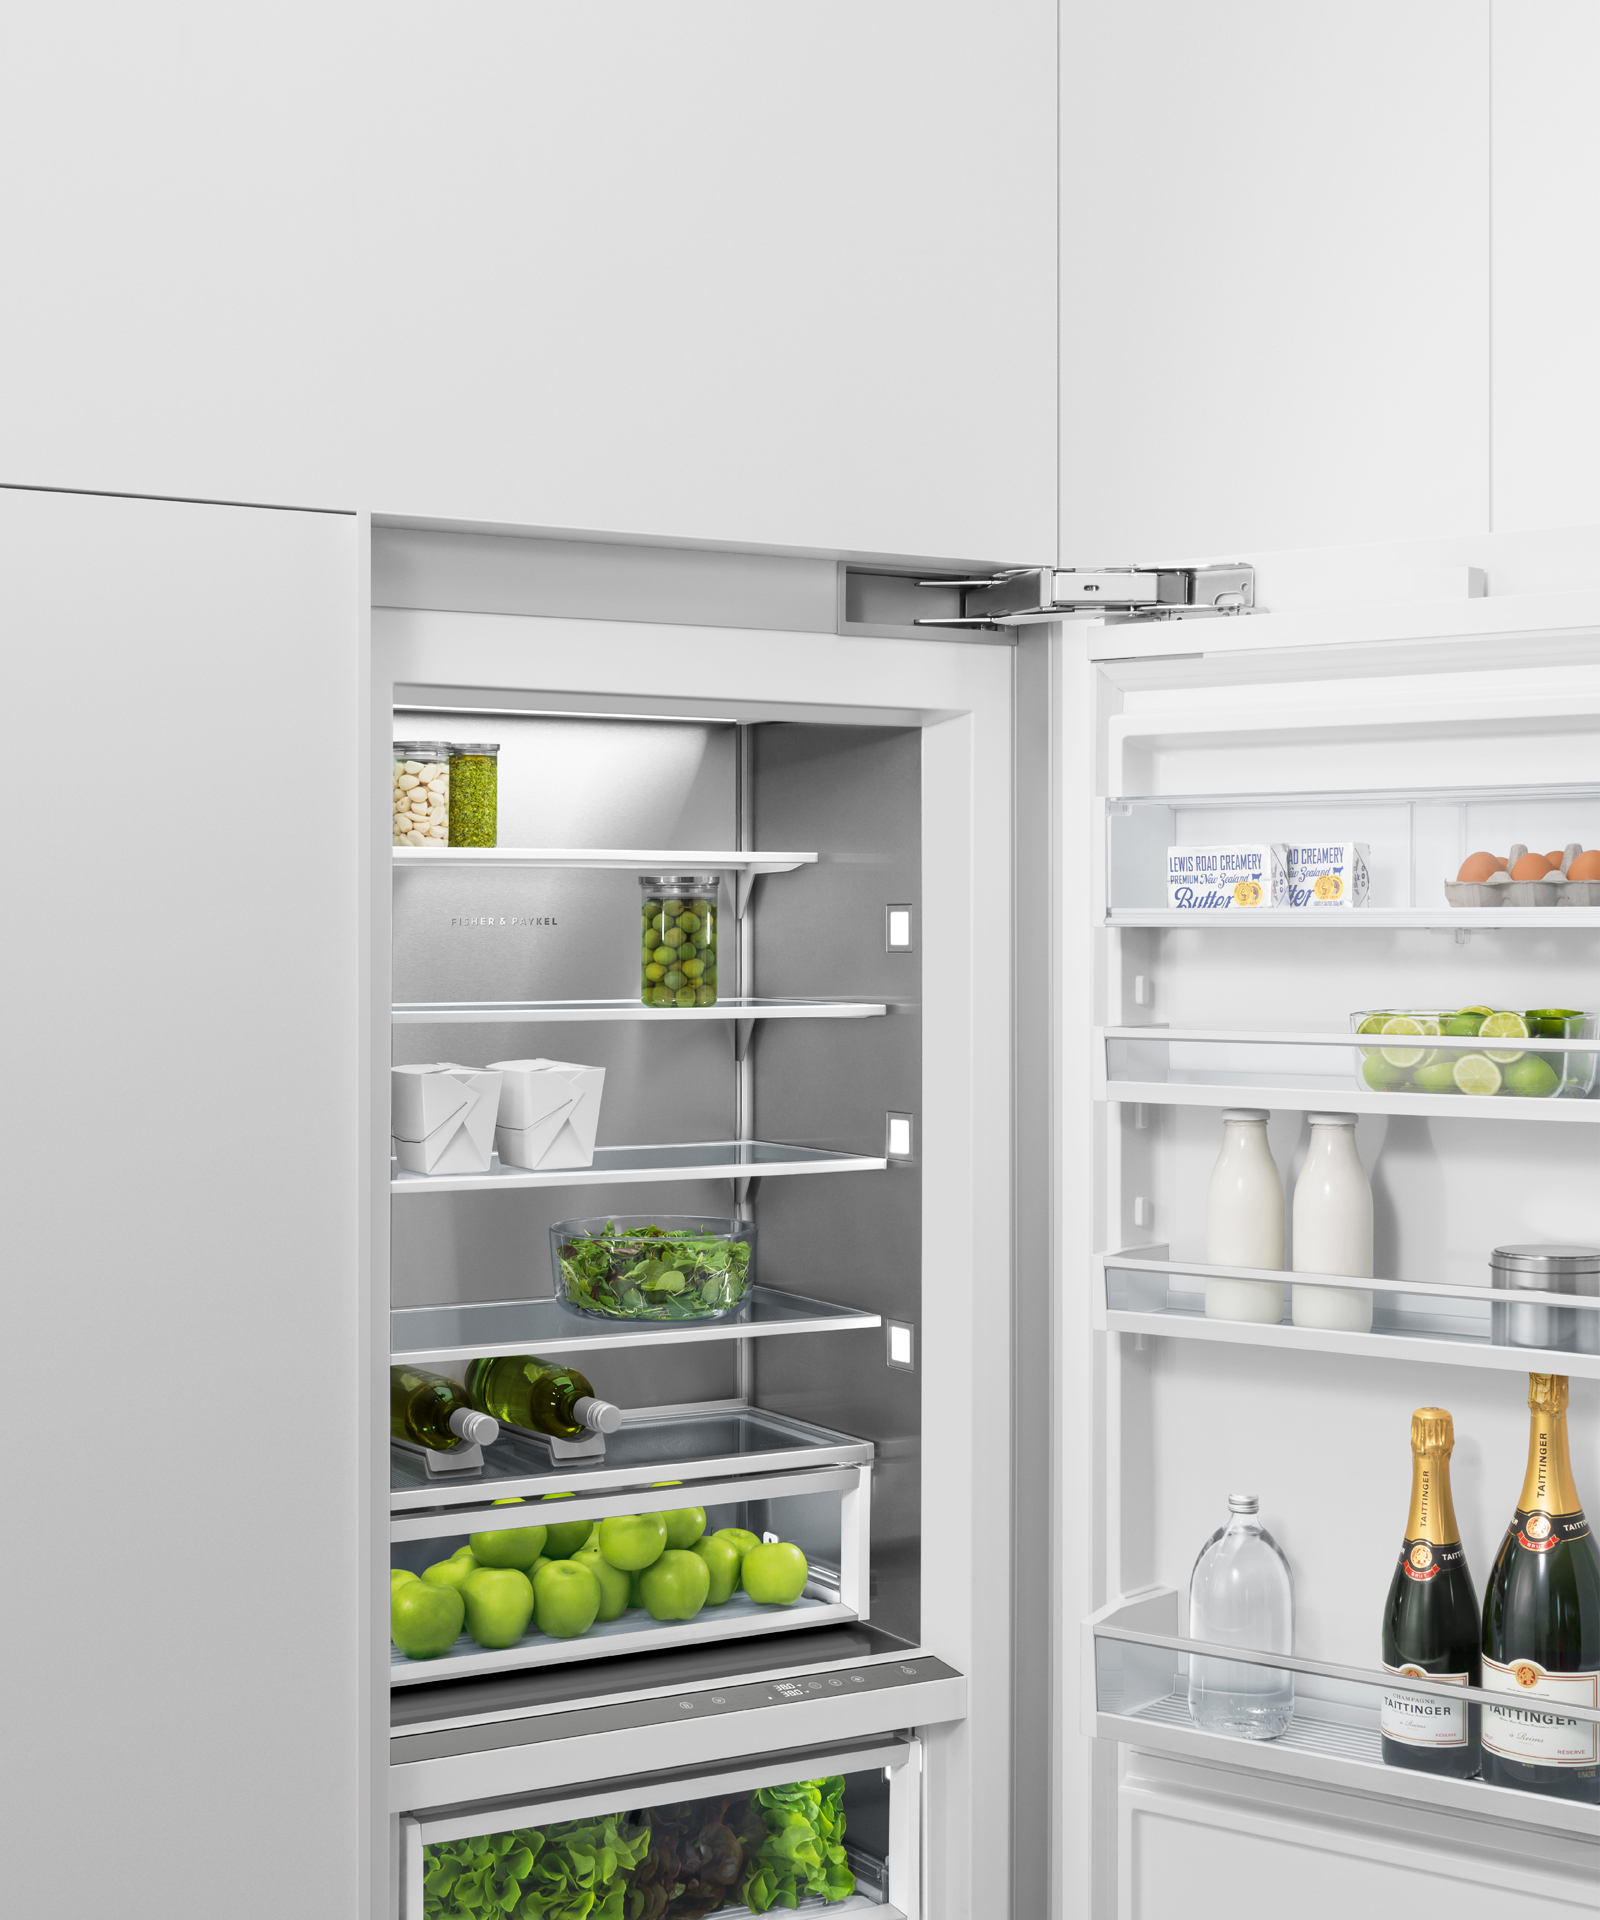 Model: RS3084SRK1 | Fisher and Paykel Integrated Column Refrigerator, 30"